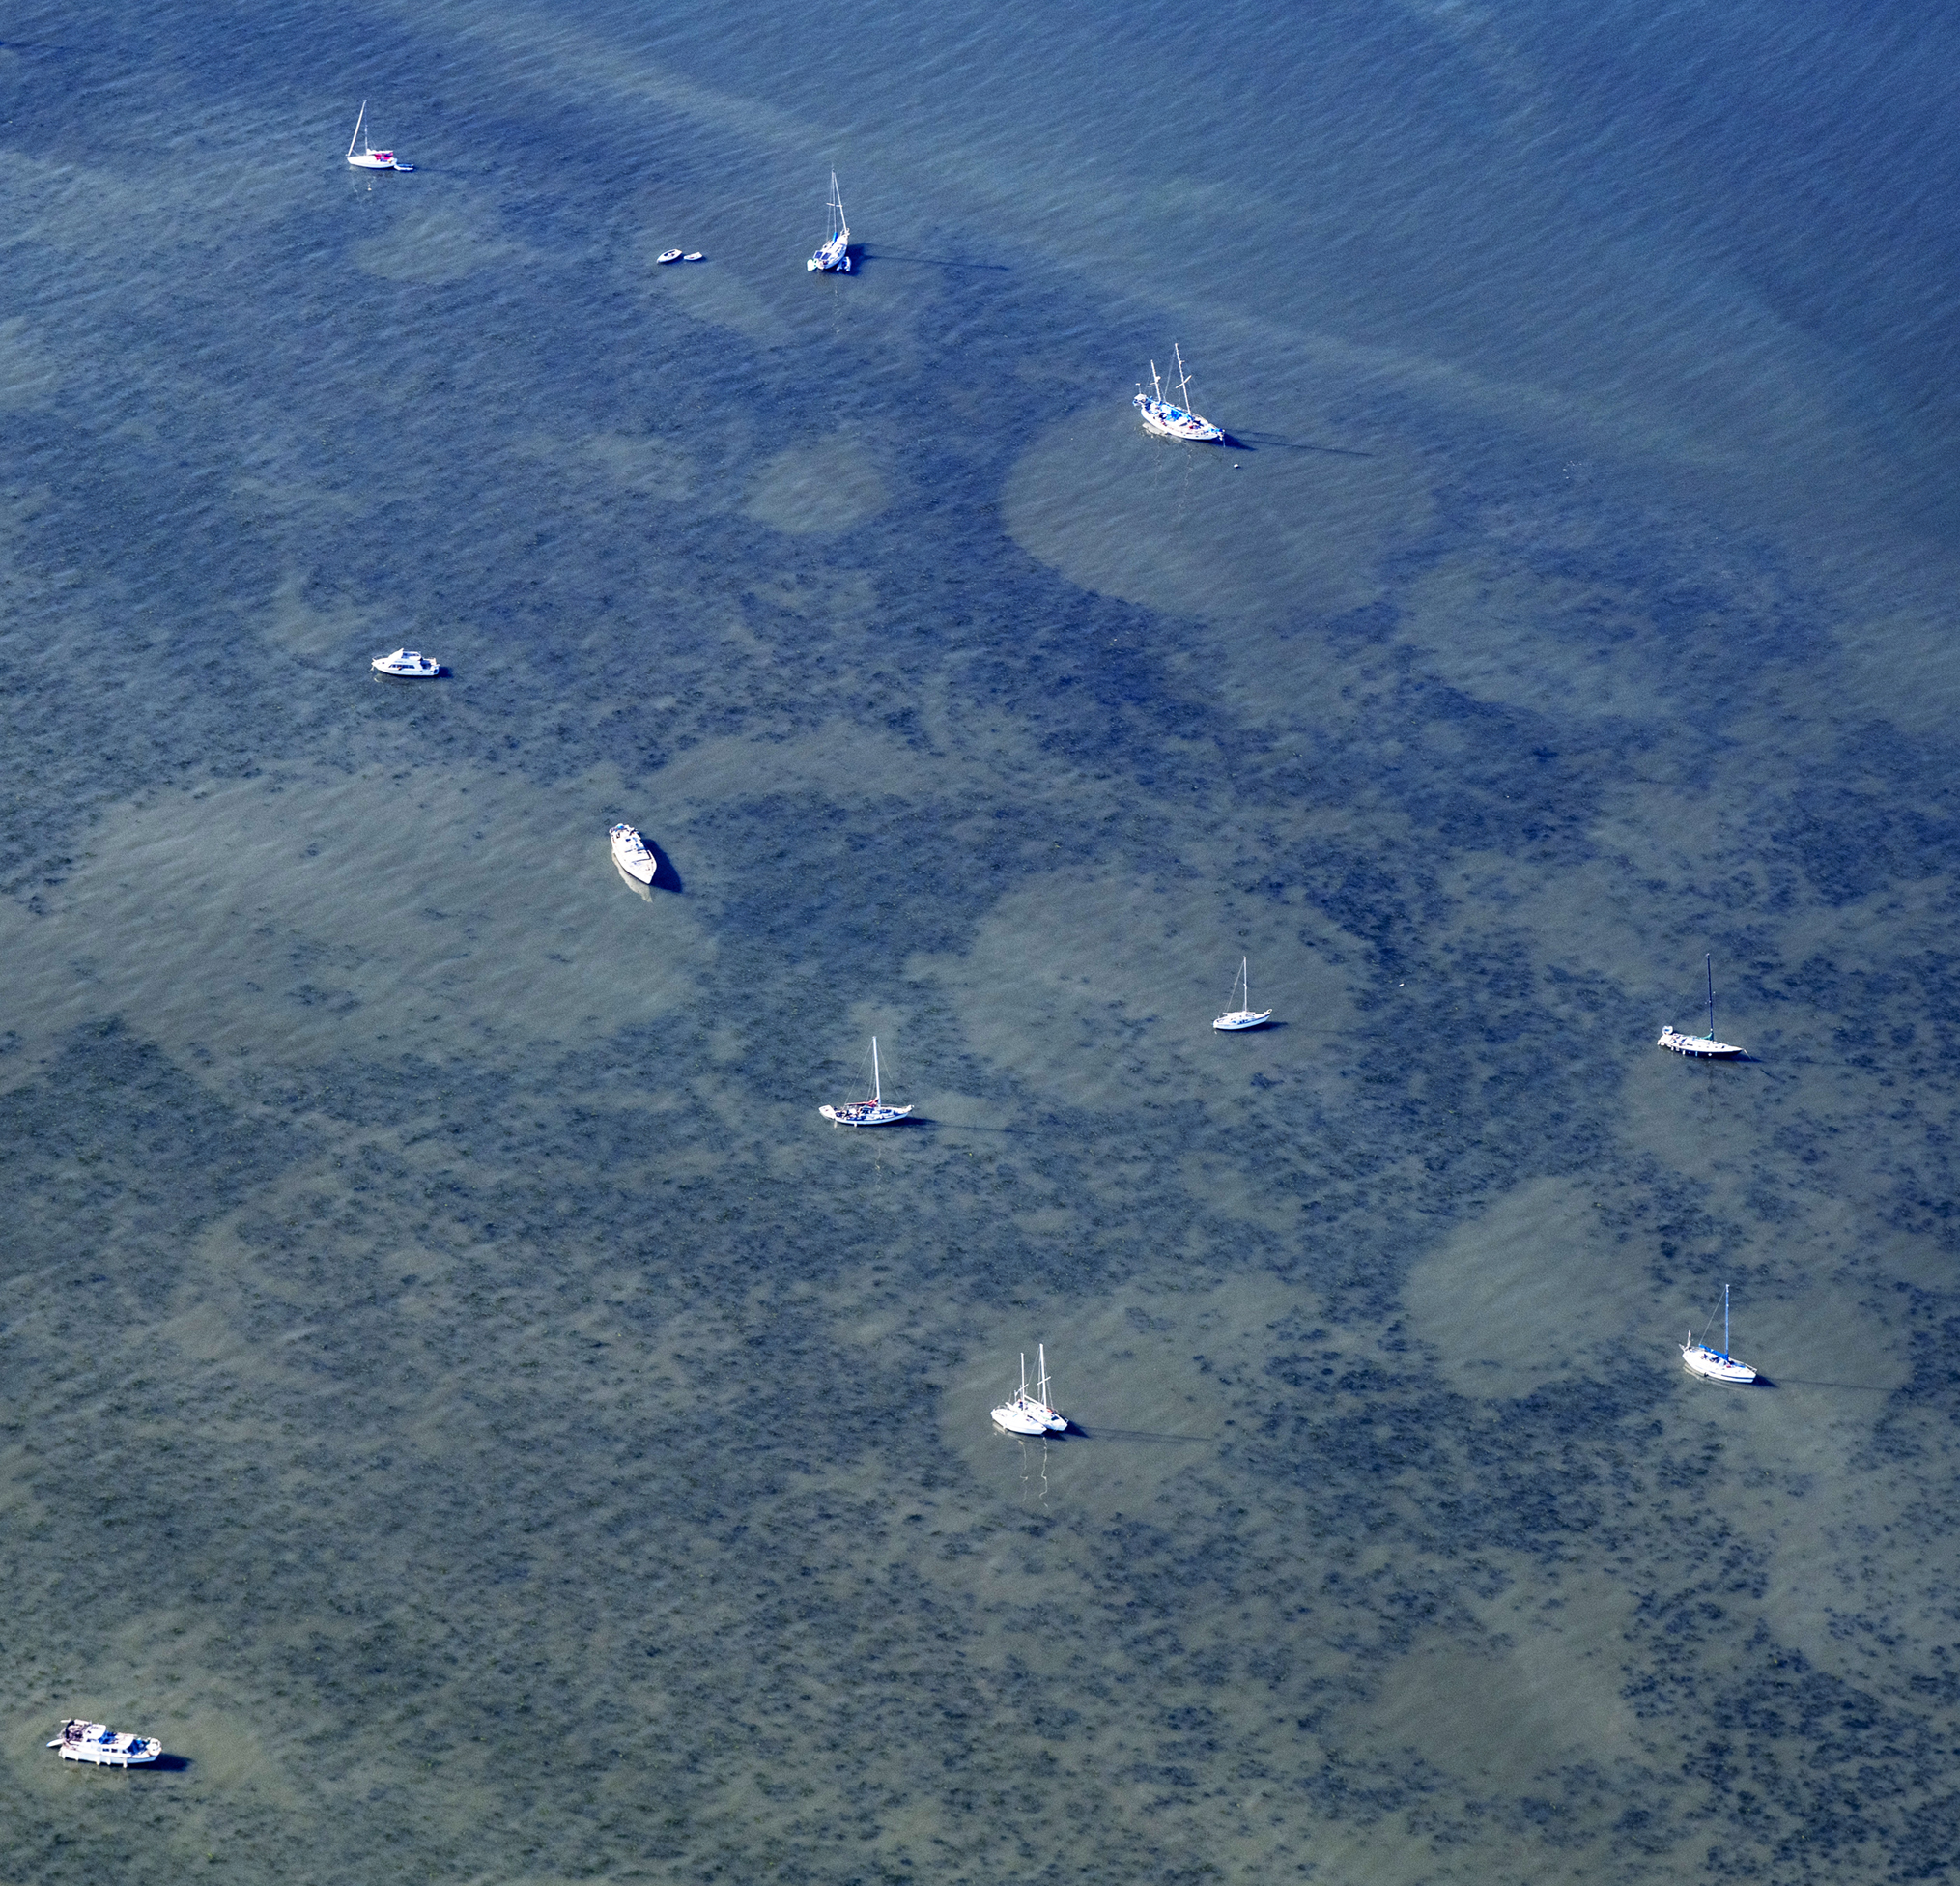 Aerial view of sailboats spread across a shallow blue sea with visible seabed textures.